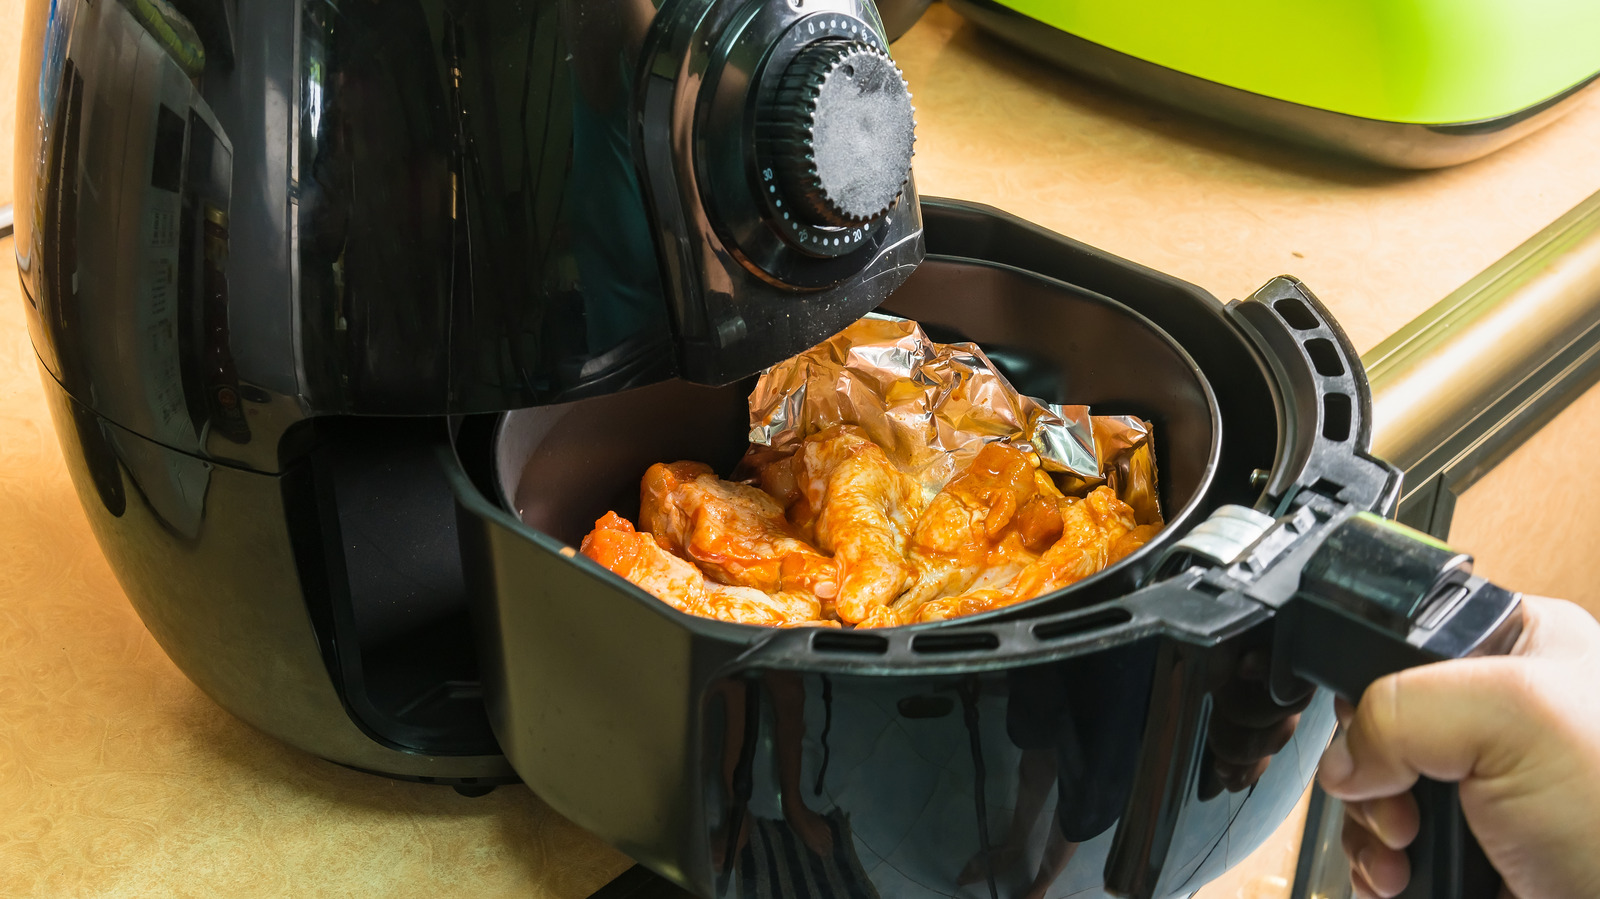 https://www.tastingtable.com/img/gallery/the-absolute-best-uses-for-your-air-fryer/l-intro-1647281670.jpg